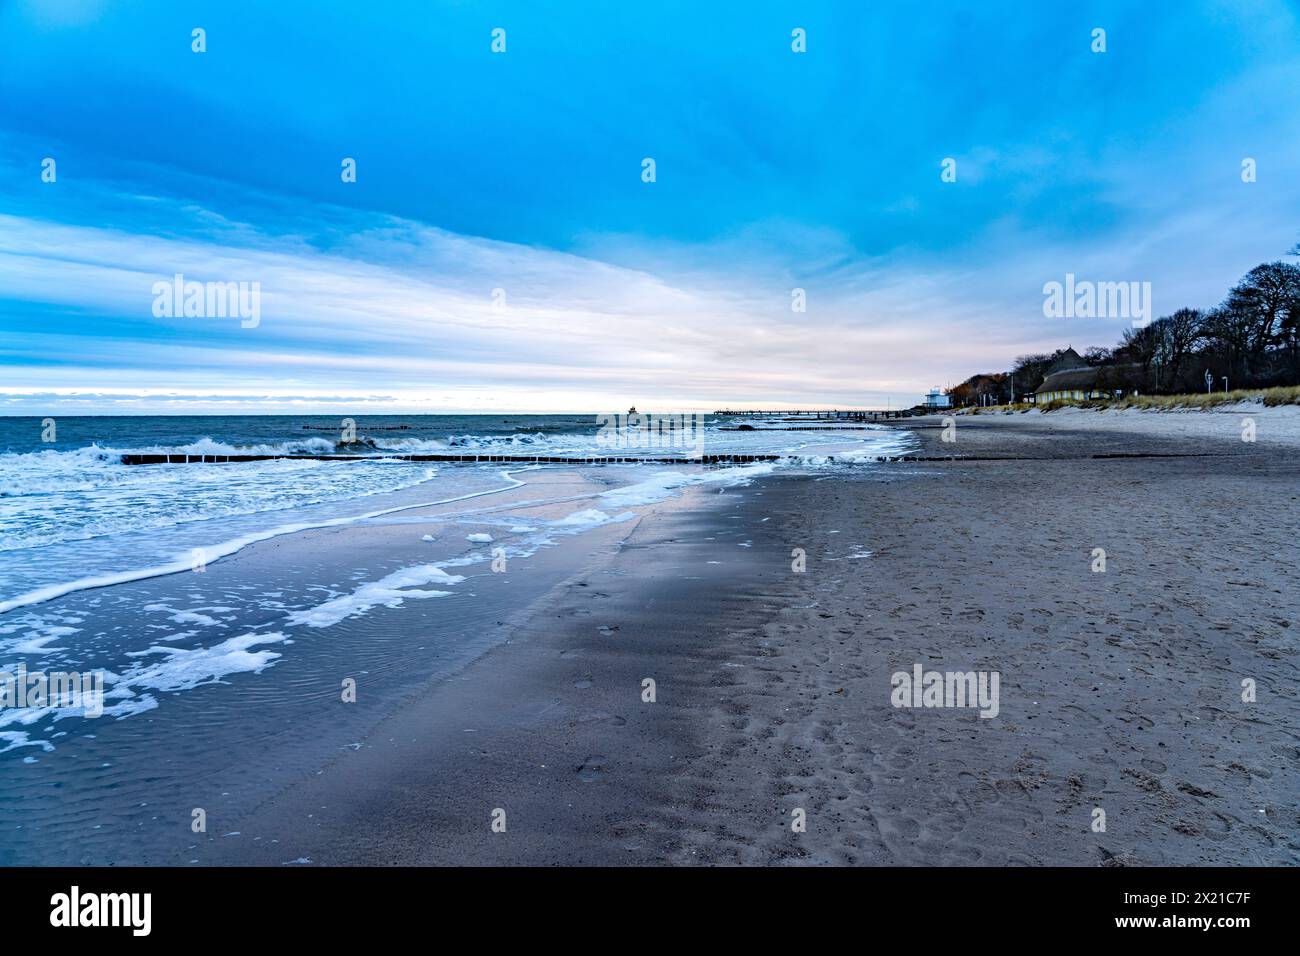 The beach of the Baltic Sea resort of Kühlungsborn in winter, Mecklenburg-Western Pomerania, Germany Stock Photo